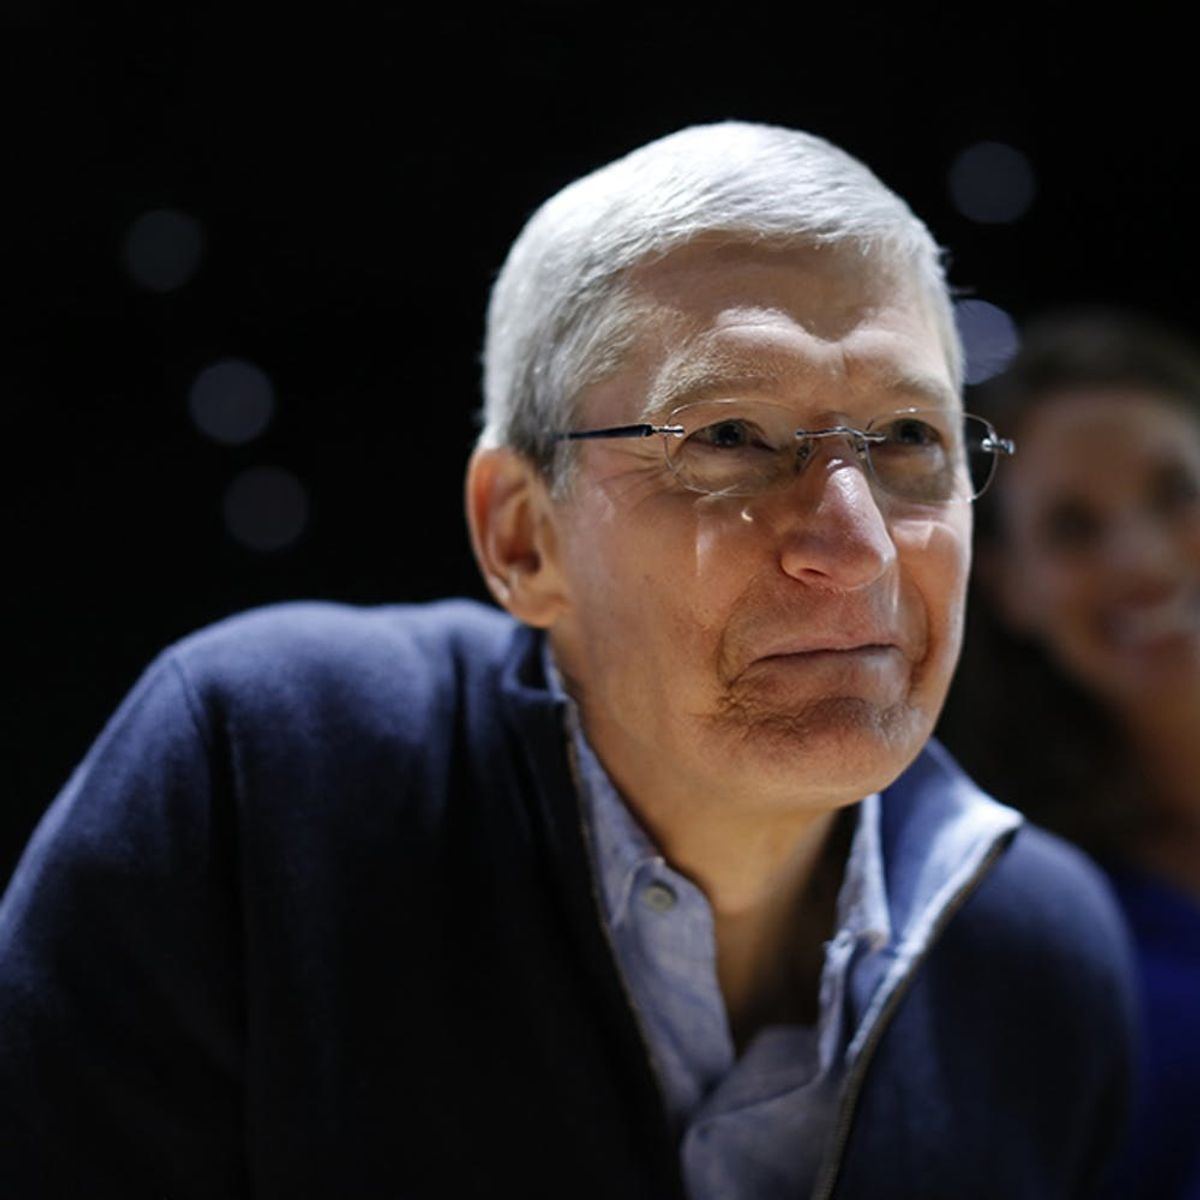 Tim Cook Just Ignited New Apple Rumors About the Co’s Next Product